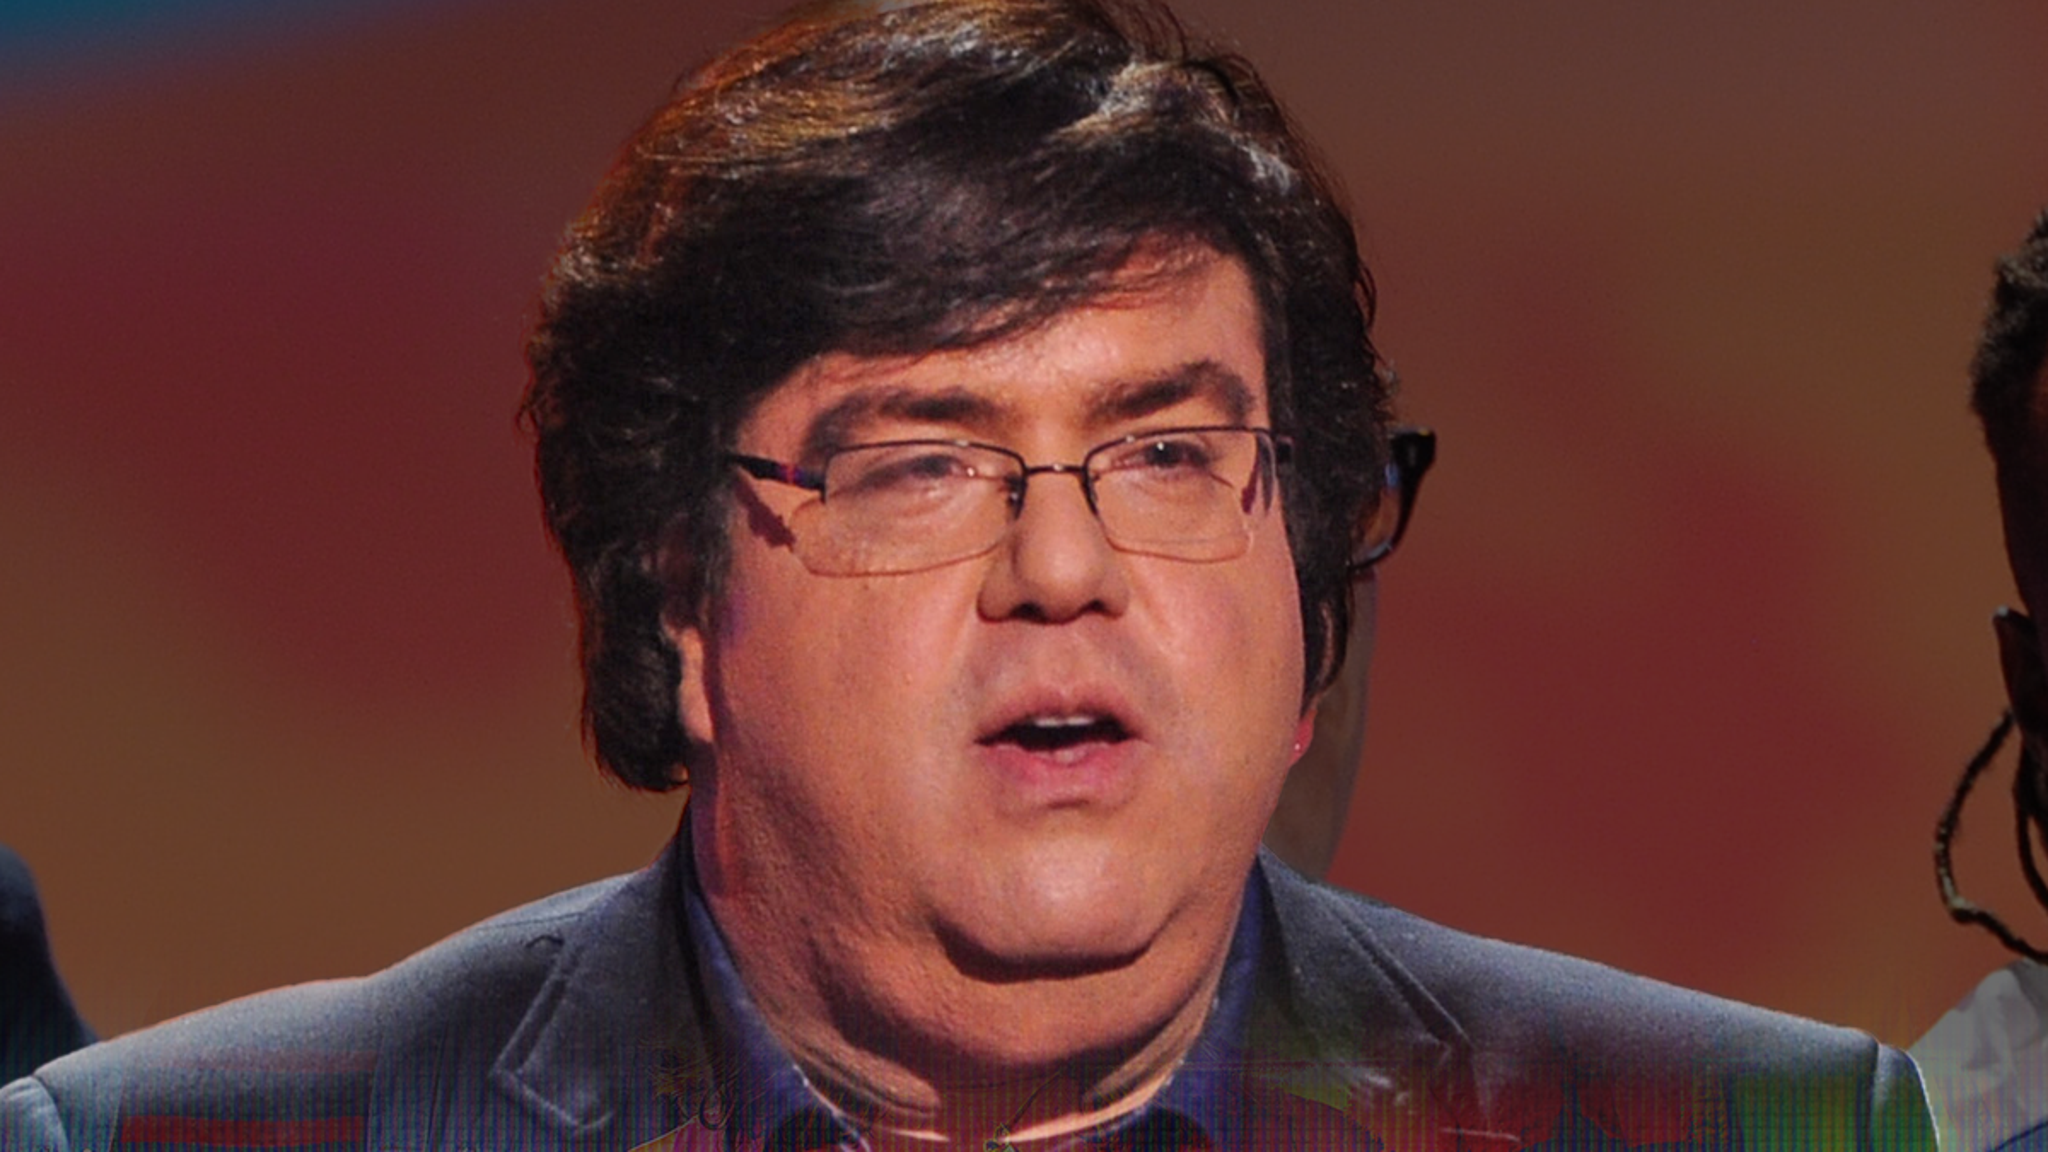 Dan Schneider Sues 'Quiet on Set' for Falsely Painting Him as Child Sex Abuser